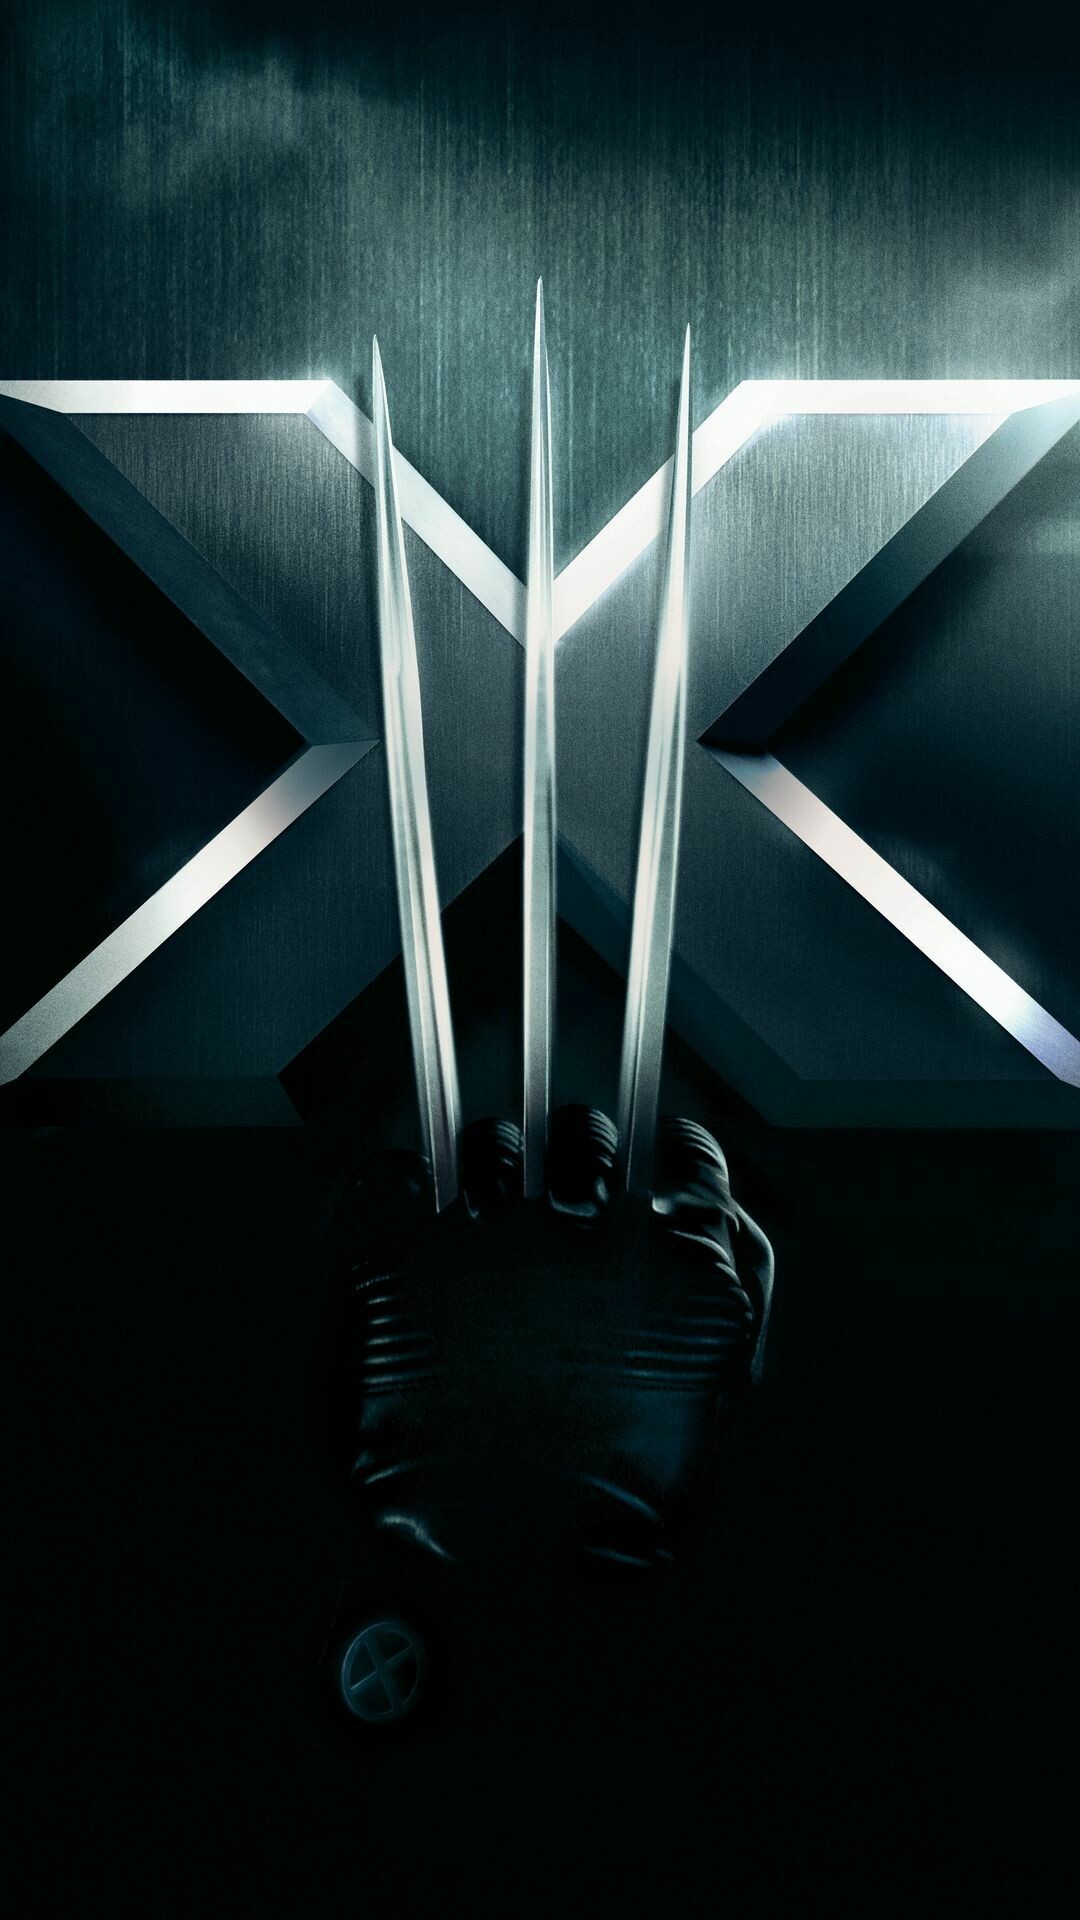 X-Men: The Last Stand, Premiered in the Out of Competition section at the 2006 Cannes Film Festival. 1080x1920 Full HD Background.